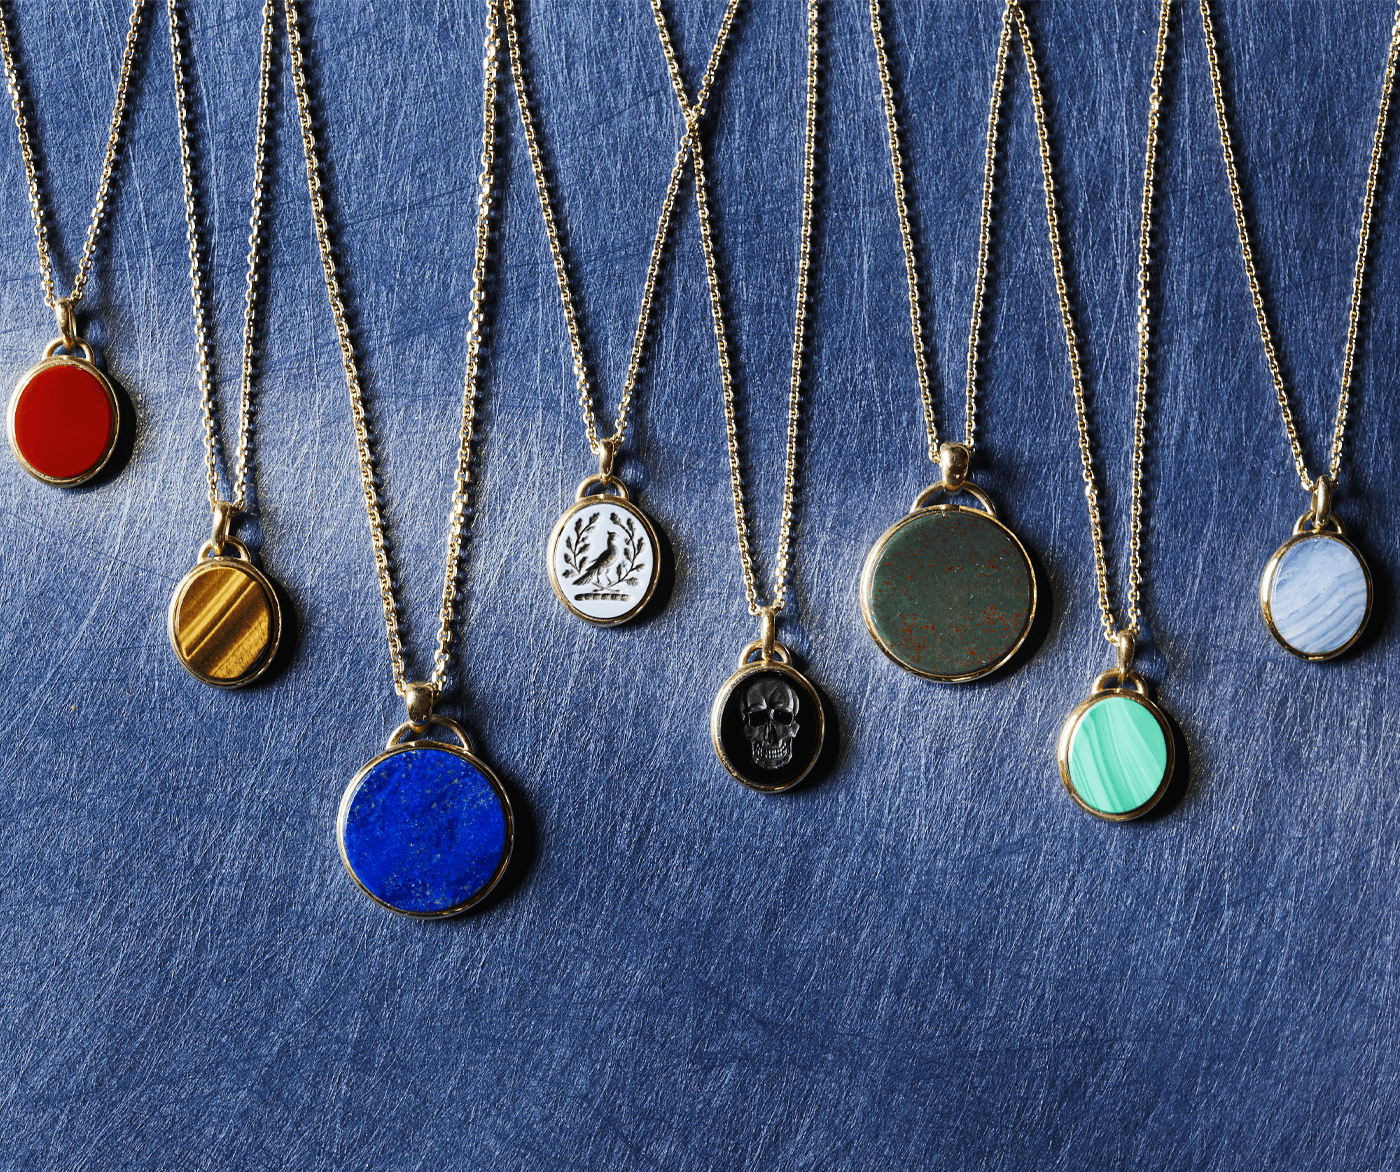 Bespoke Rebus pendants in multiple precious metals, agates, and with personalised engravings